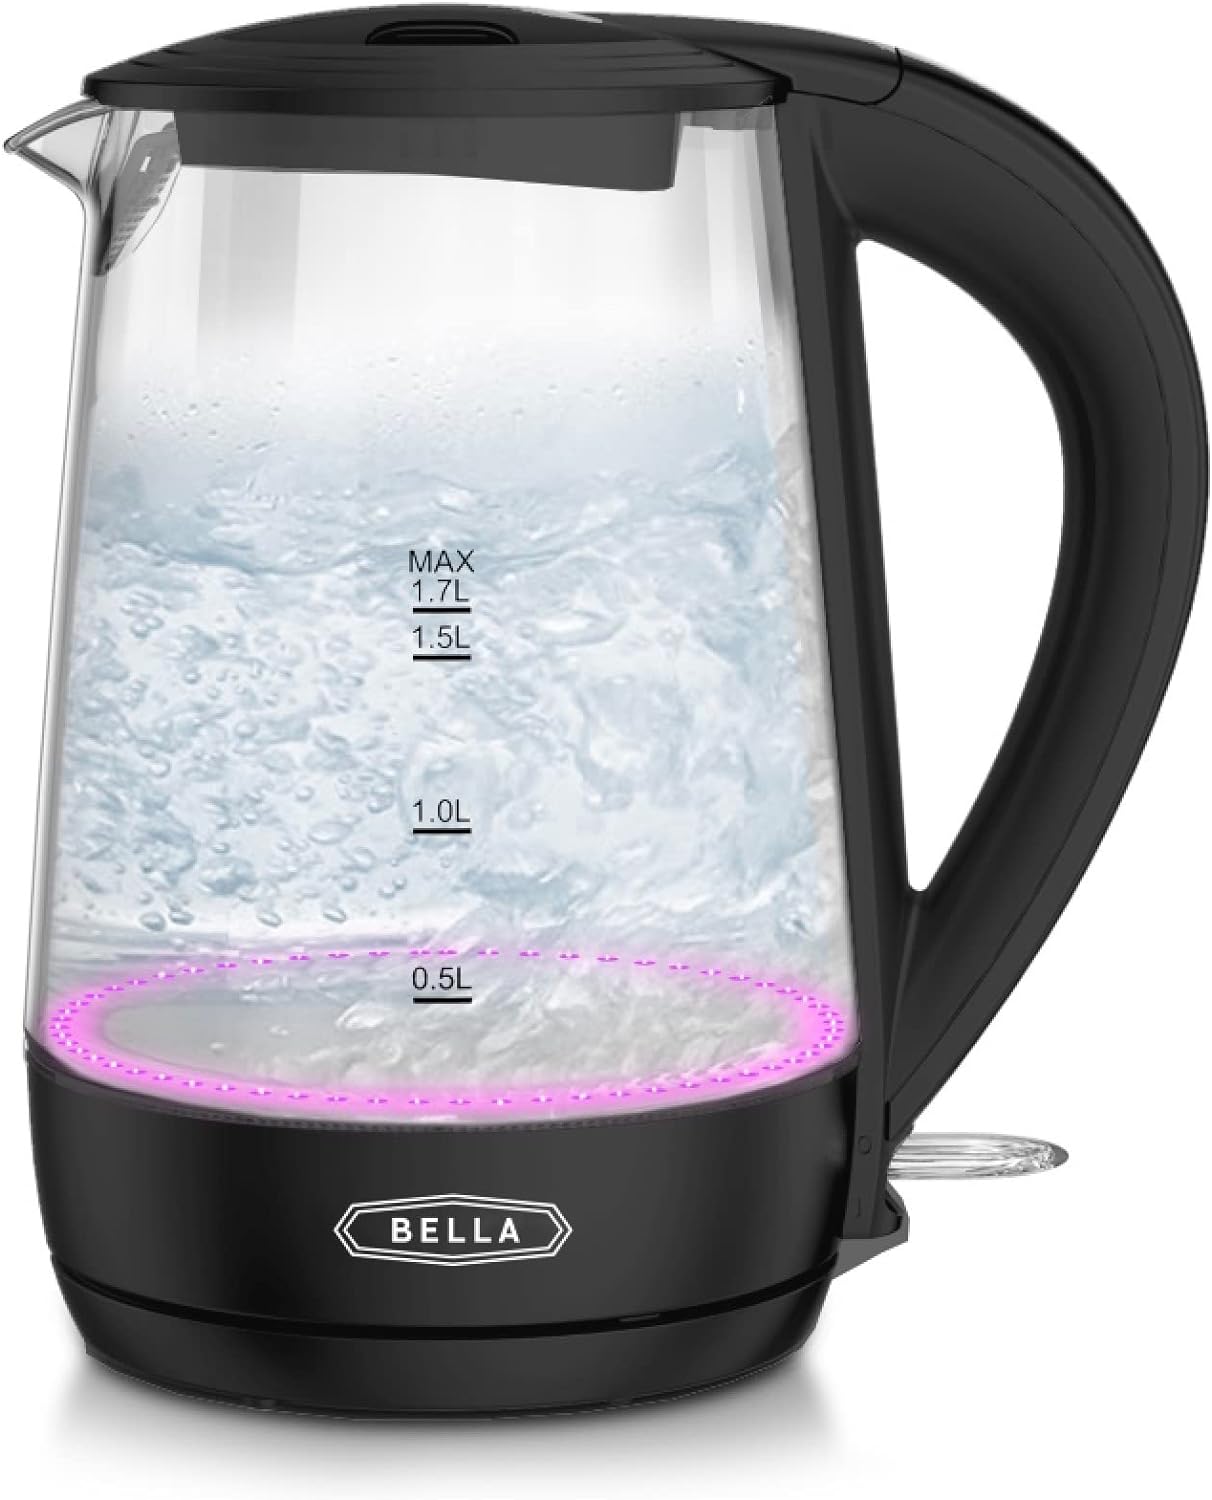 BELLA 1.7 Liter Glass Electric Kettle, Quickly Boil 7 Cups of Water in 6-7 Minutes, Soft Pink LED Lights Illuminate While Boiling, Cordless Portable Water Heater, Carefree Auto Shut-Off, Black